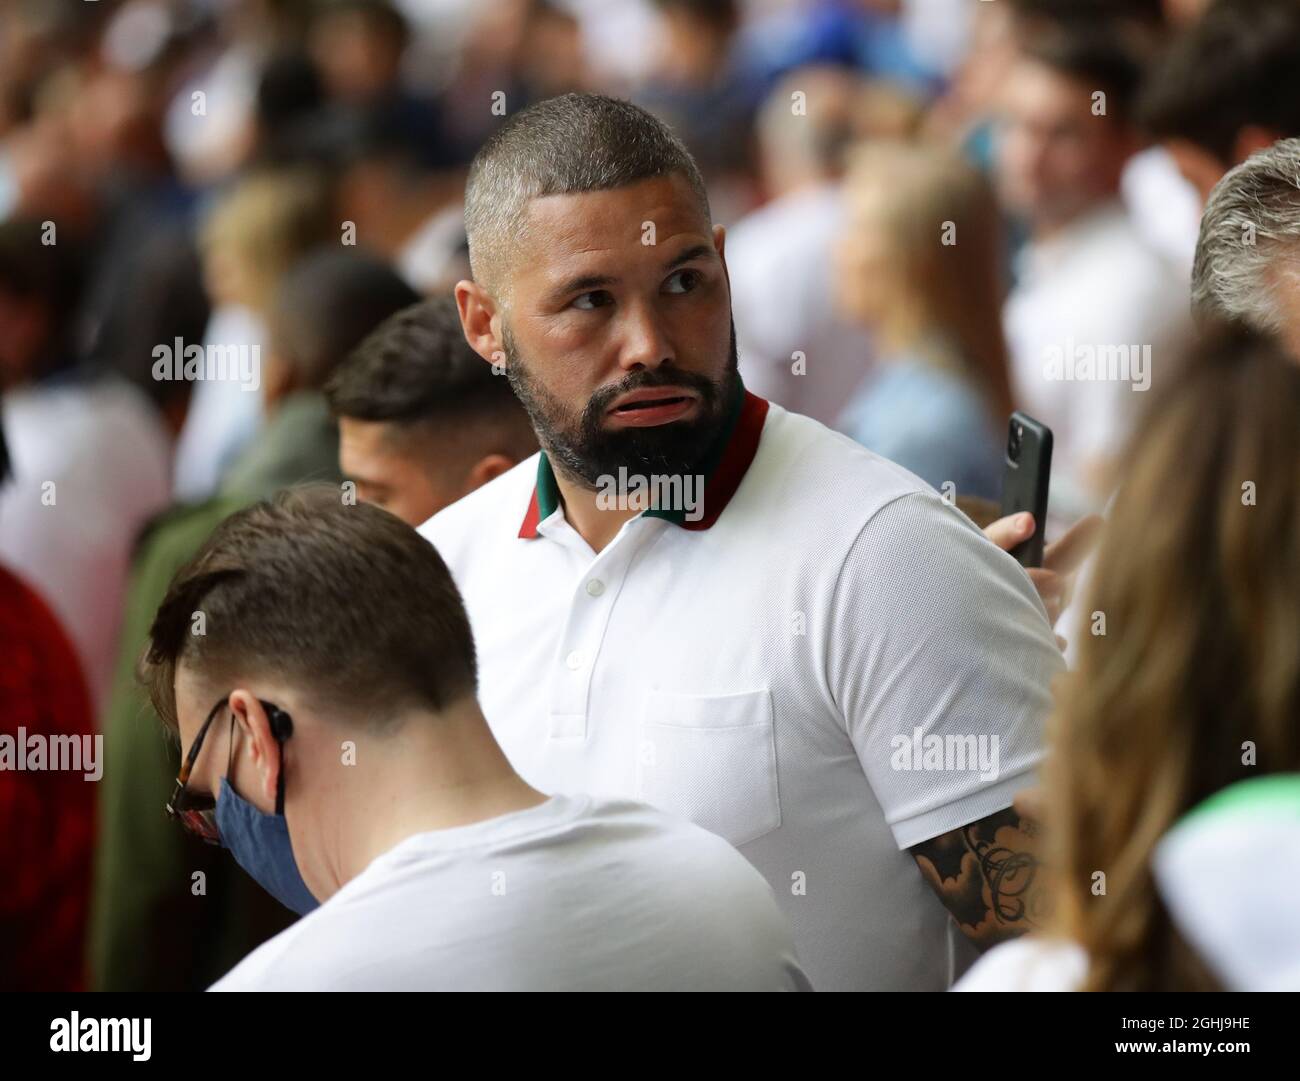 London, England, 11th July 2021. Former boxer Tony Bellew looks on nervously before the UEFA Euro 2020 final at Wembley Stadium, London. Picture credit should read: David Klein / Sportimage via PA Images Stock Photo